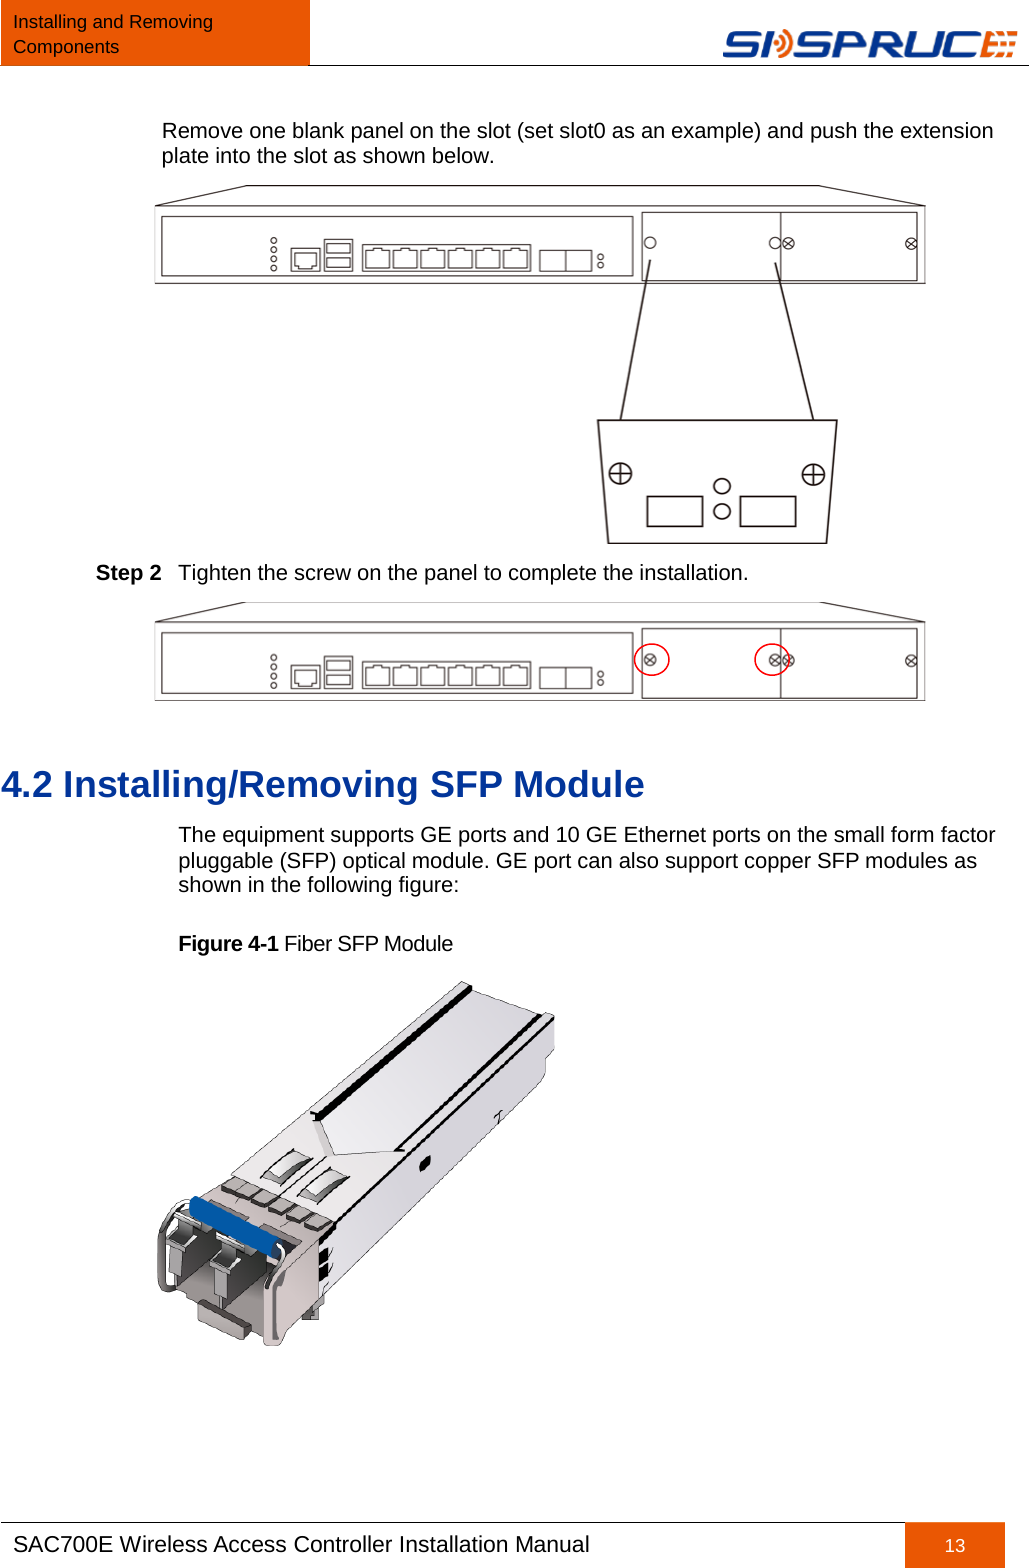 Installing and Removing Components   SAC700E Wireless Access Controller Installation Manual 13  Remove one blank panel on the slot (set slot0 as an example) and push the extension plate into the slot as shown below.  Step 2 Tighten the screw on the panel to complete the installation.  4.2 Installing/Removing SFP Module The equipment supports GE ports and 10 GE Ethernet ports on the small form factor pluggable (SFP) optical module. GE port can also support copper SFP modules as shown in the following figure: Figure 4-1 Fiber SFP Module  